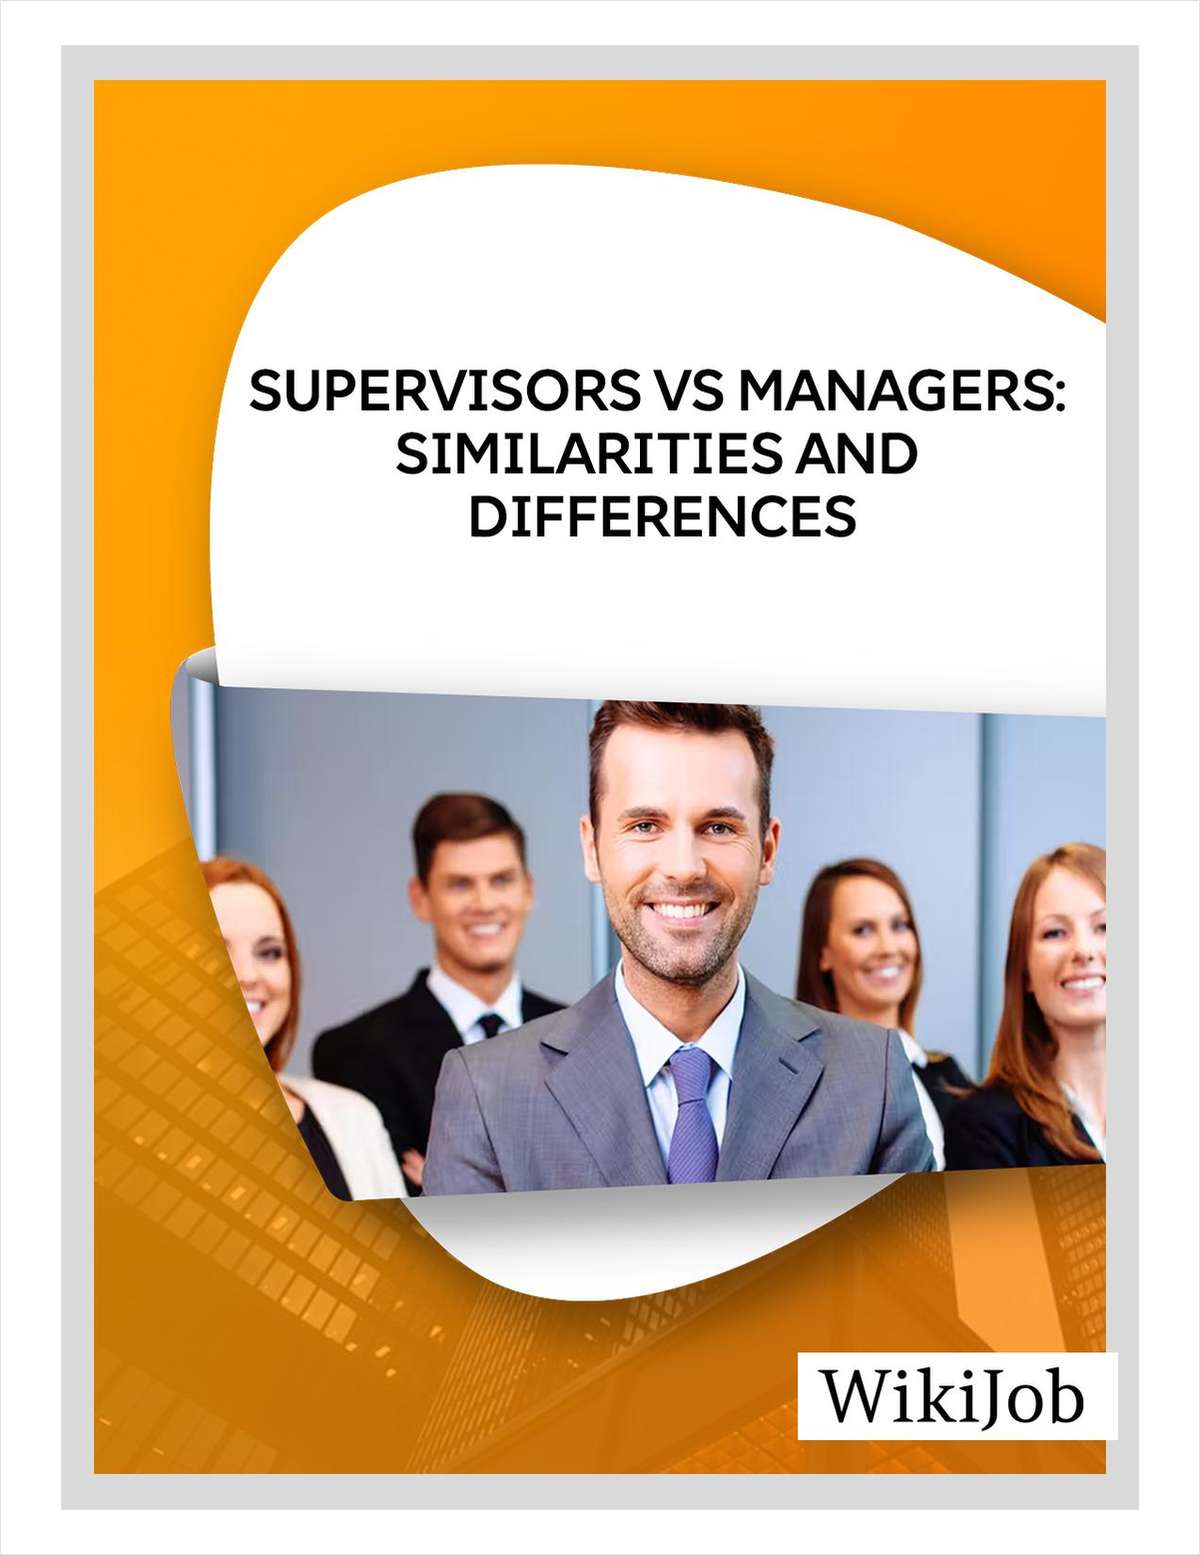 Supervisors VS Managers: Similarities and Differences